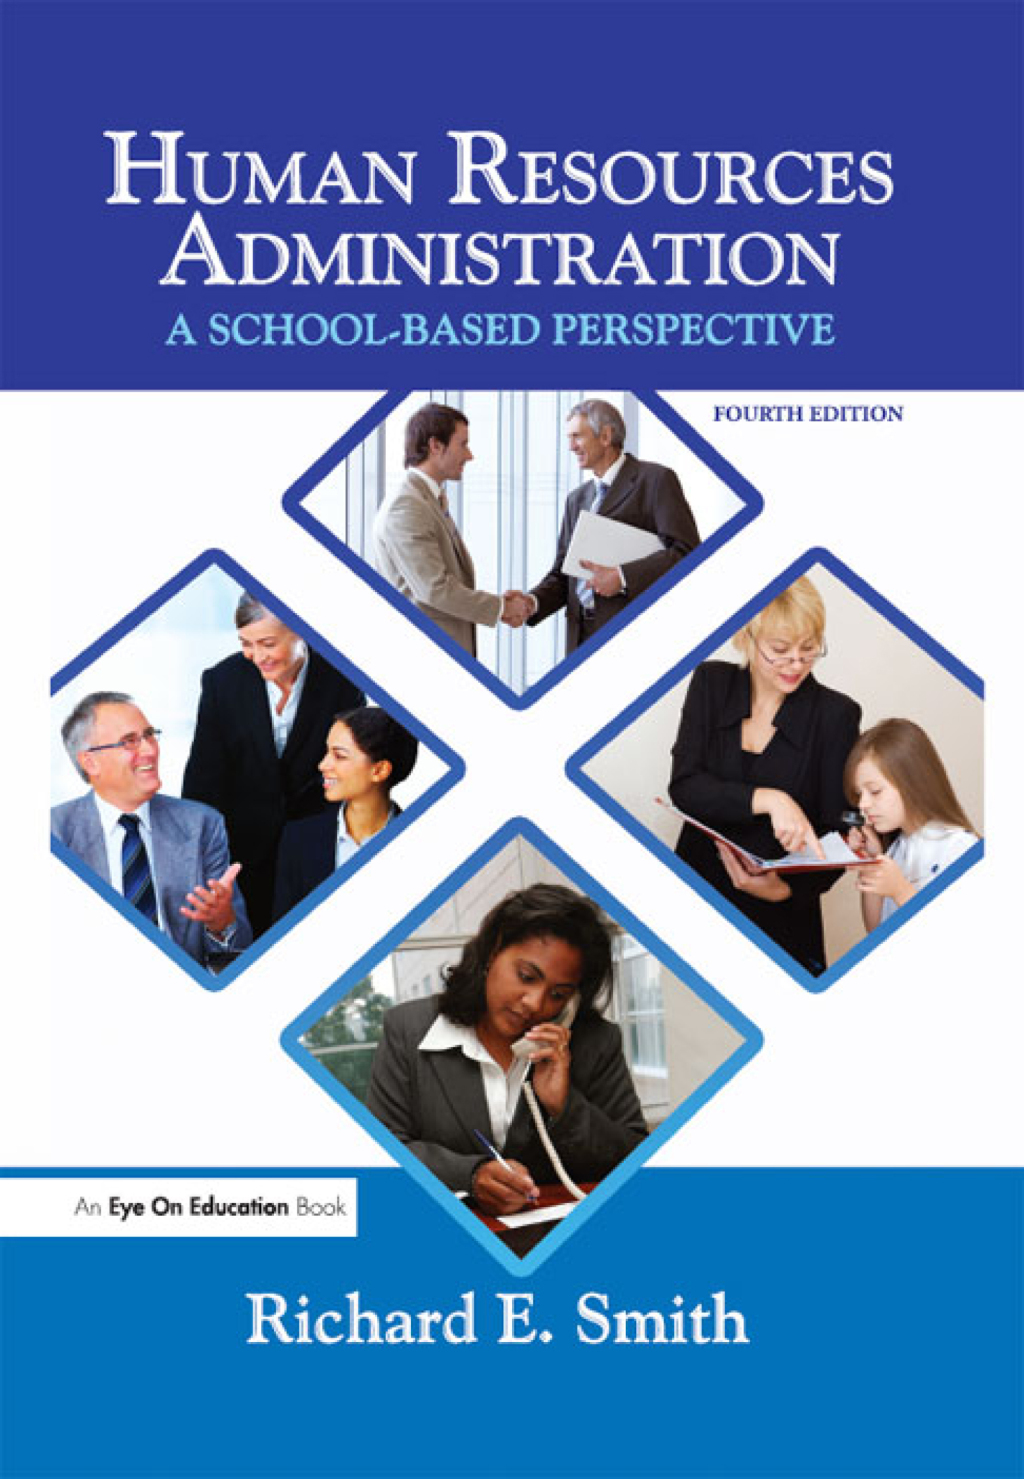 Human Resources Administration (eBook) - Richard Smith